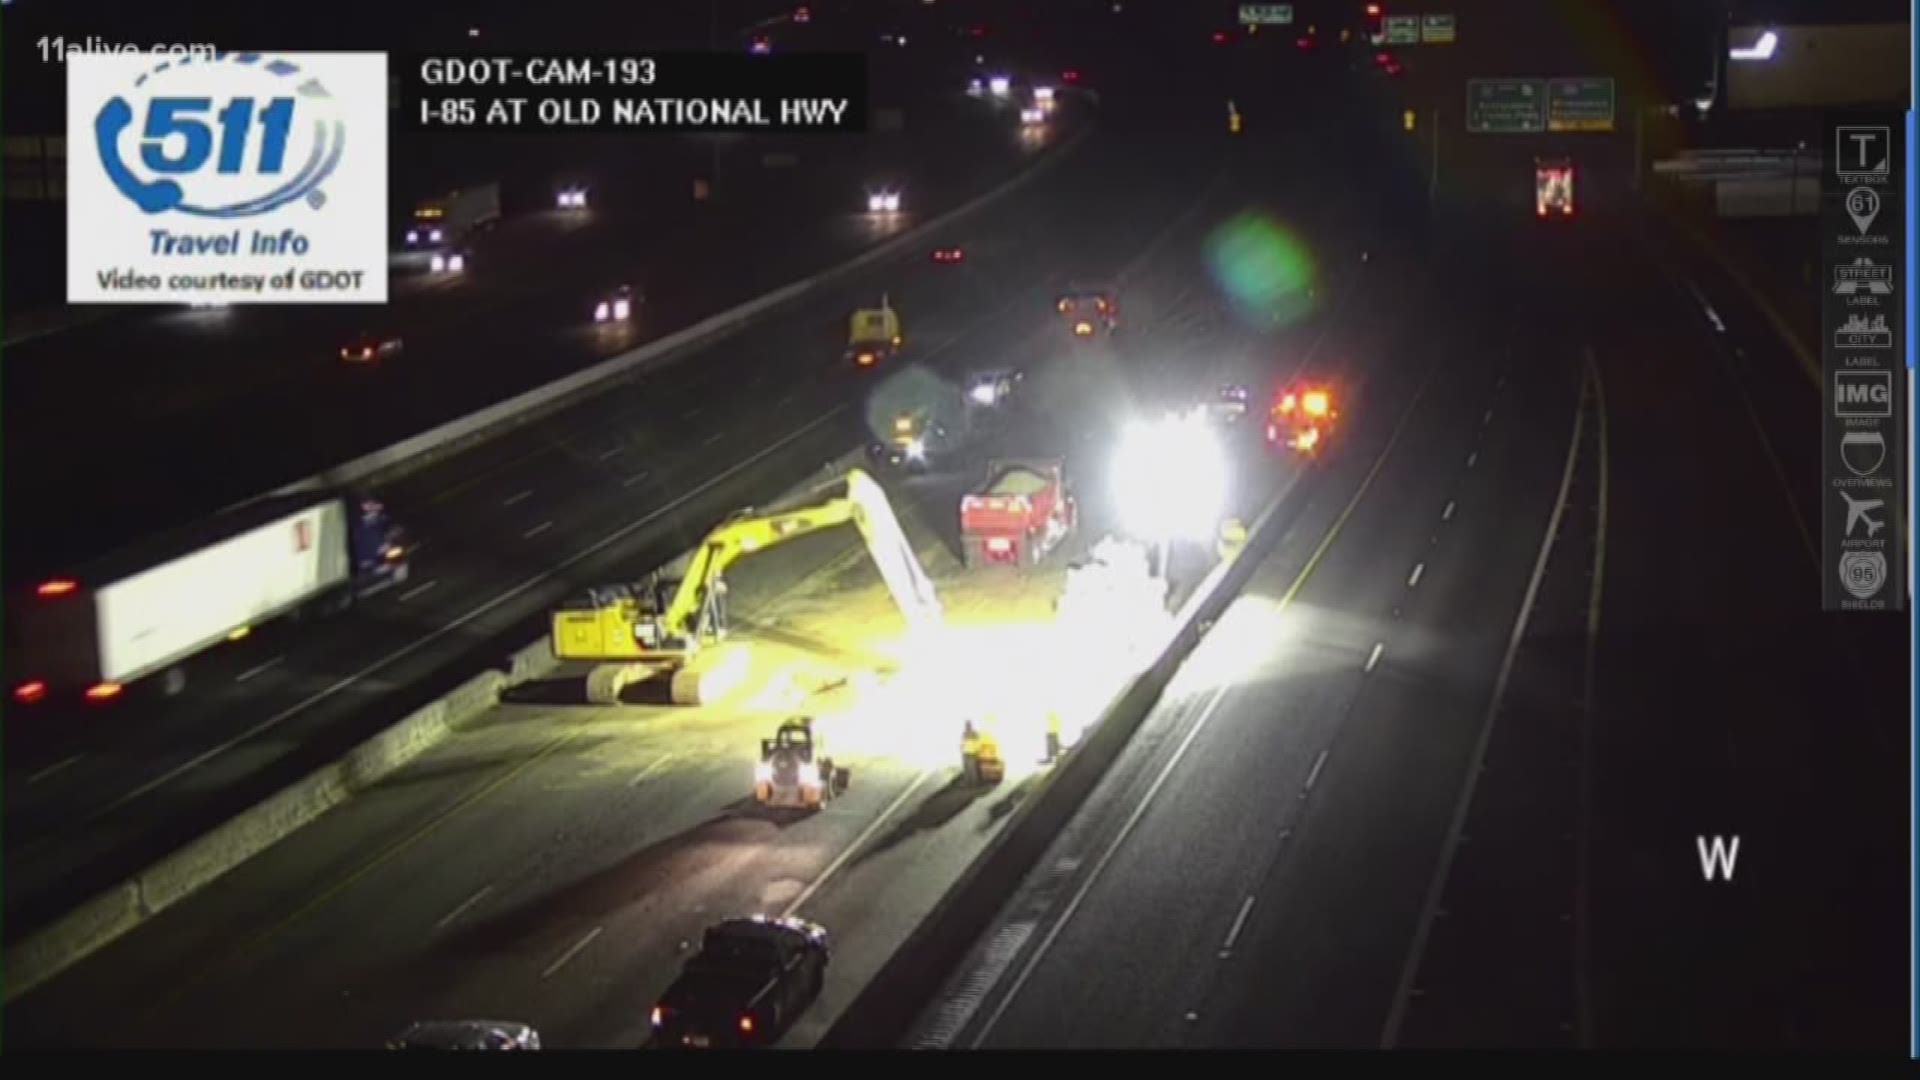 All lanes on I-285 westbound between Old National Hwy at exit 62 and Washington Road at exit 1 will be blocked as crew work to repair the sinkhole.